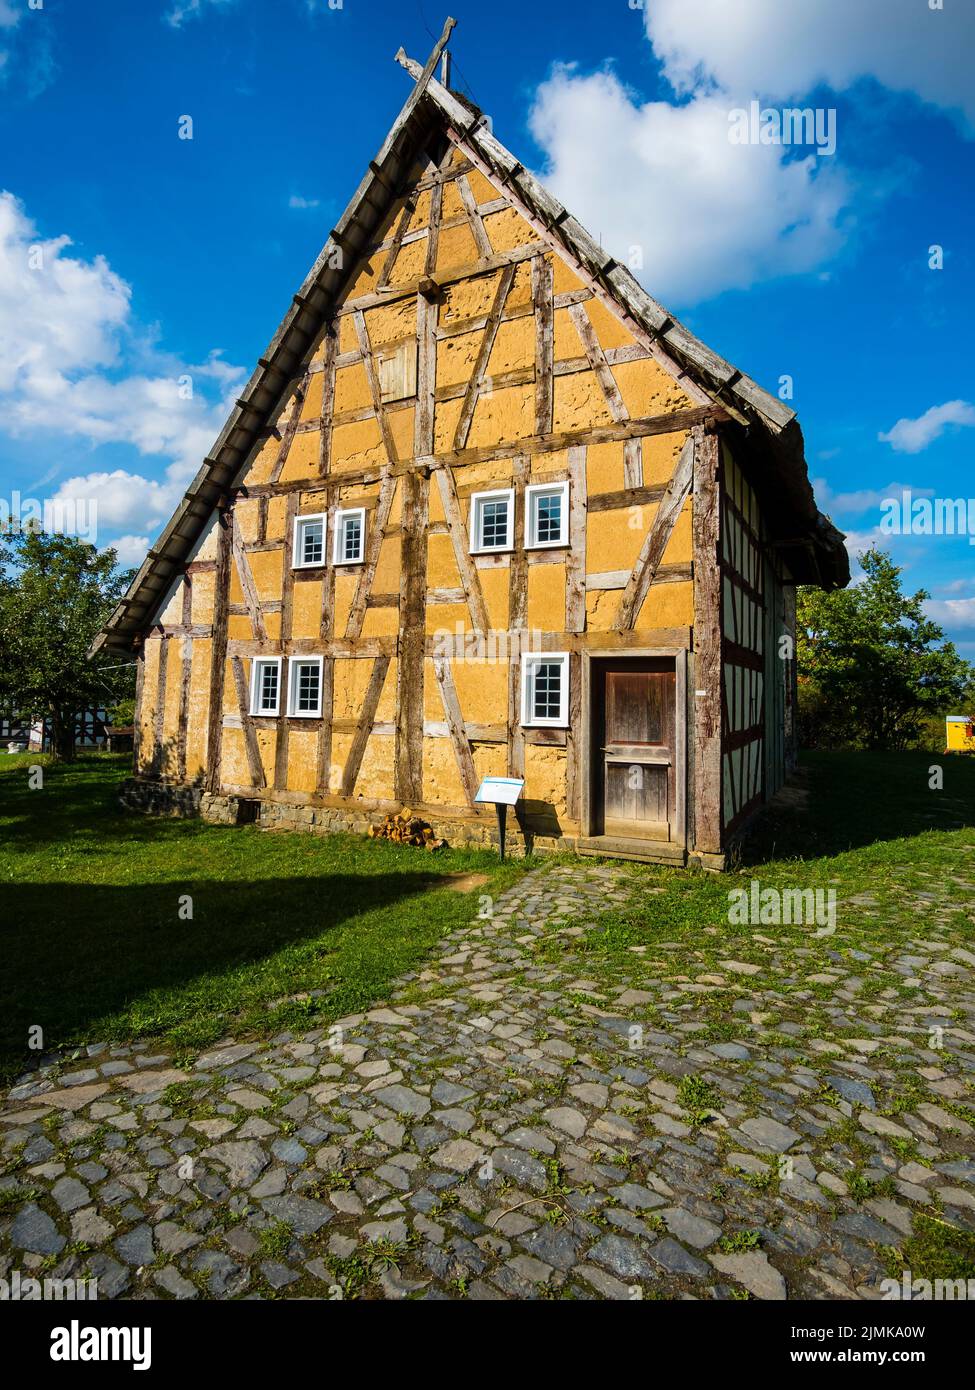 Historical half-timbered house in the open-air museum Hessenpark Stock Photo